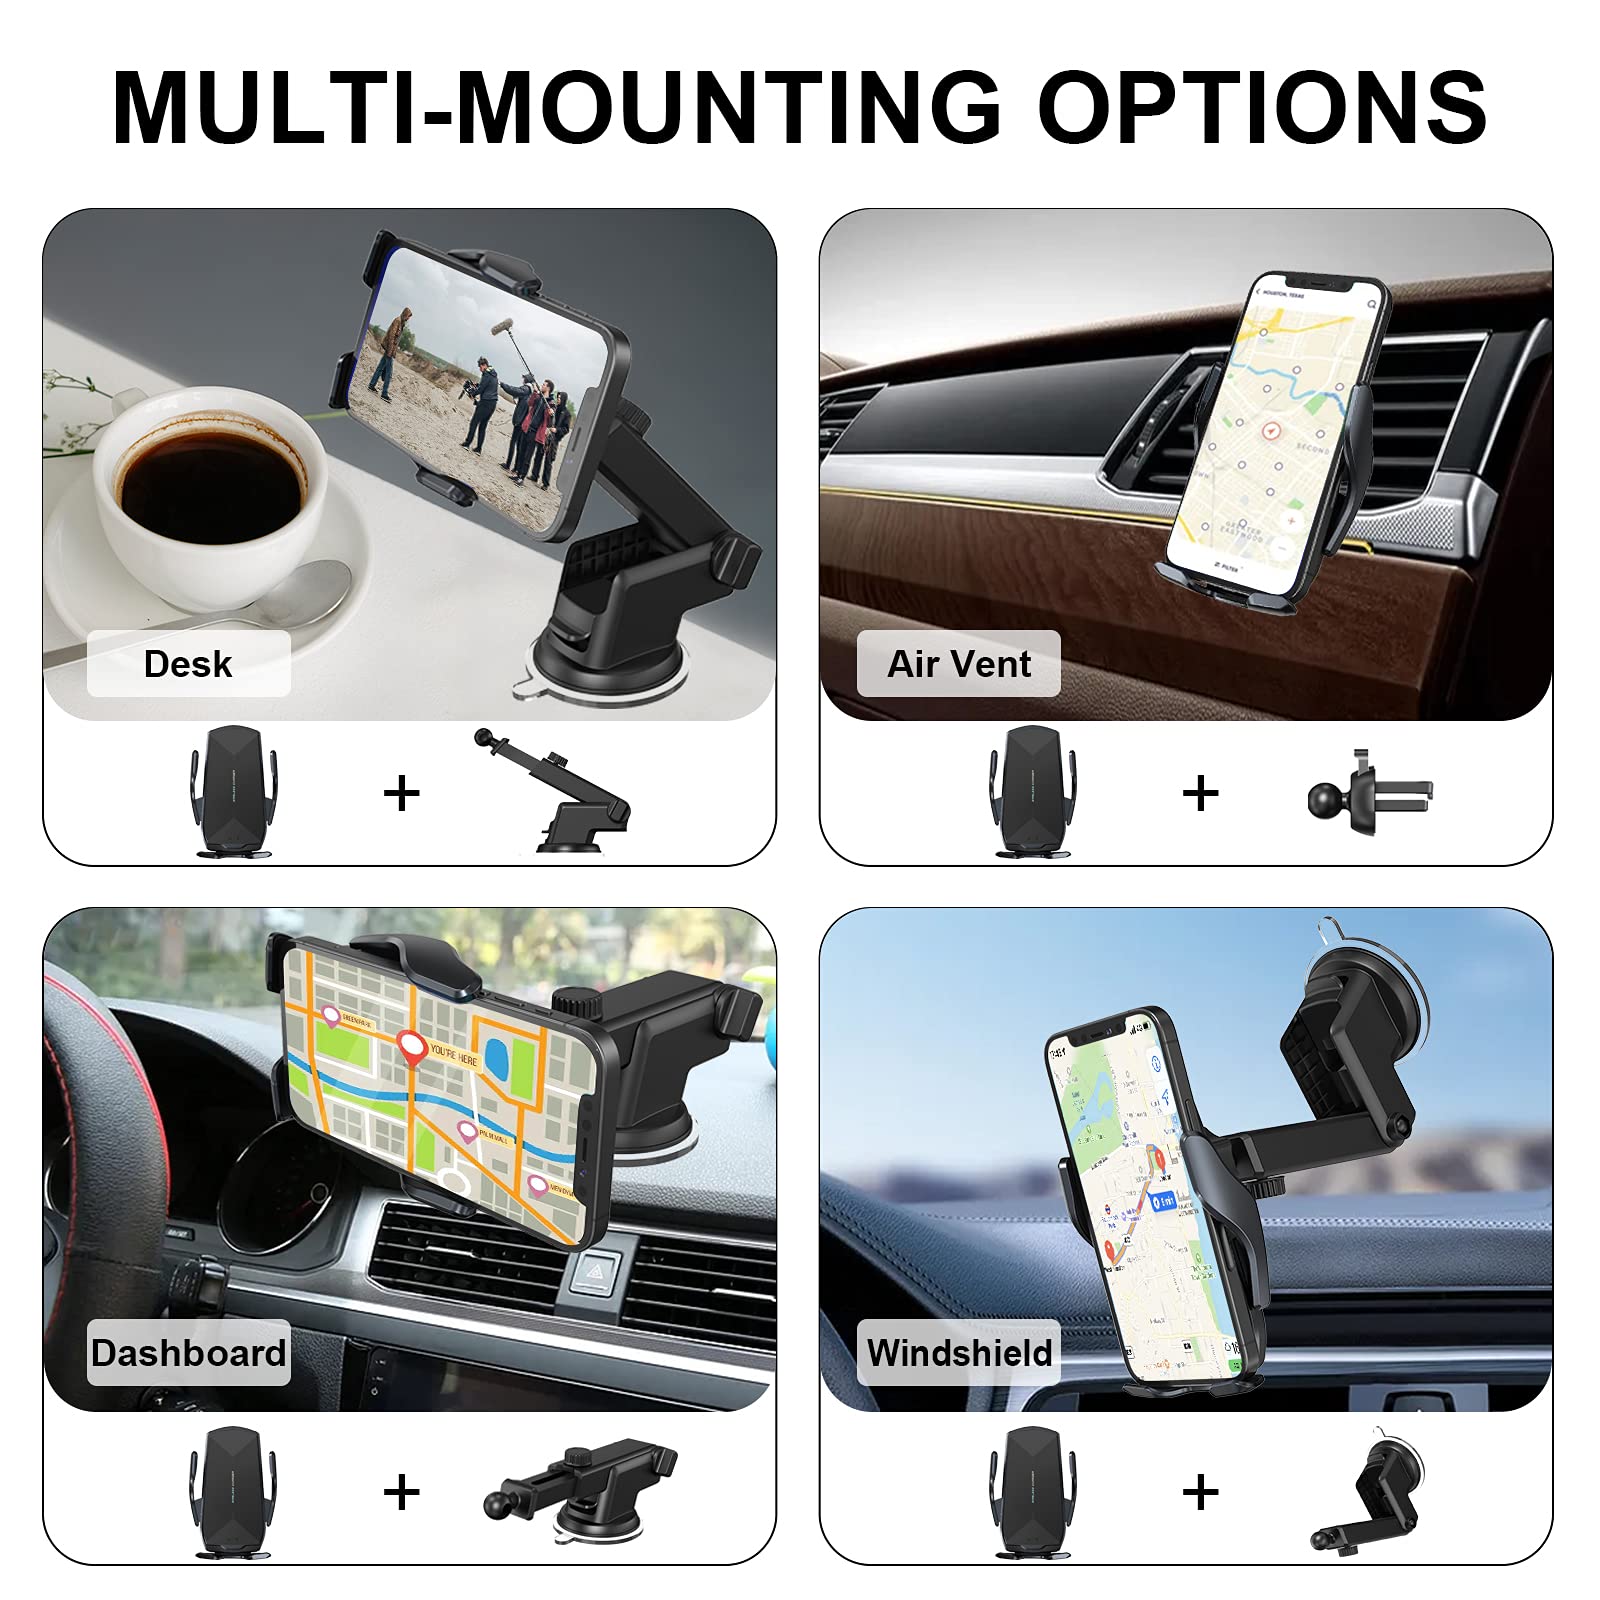 Wireless Car Charger Mount,15W Qi Fast Charging Auto-Clamping Car Phone Holder, Air Vent Windshield Dashboard Car Phone Mount for iPhone 13/12/11 Pro Max,Samsung S20/S10/Note10